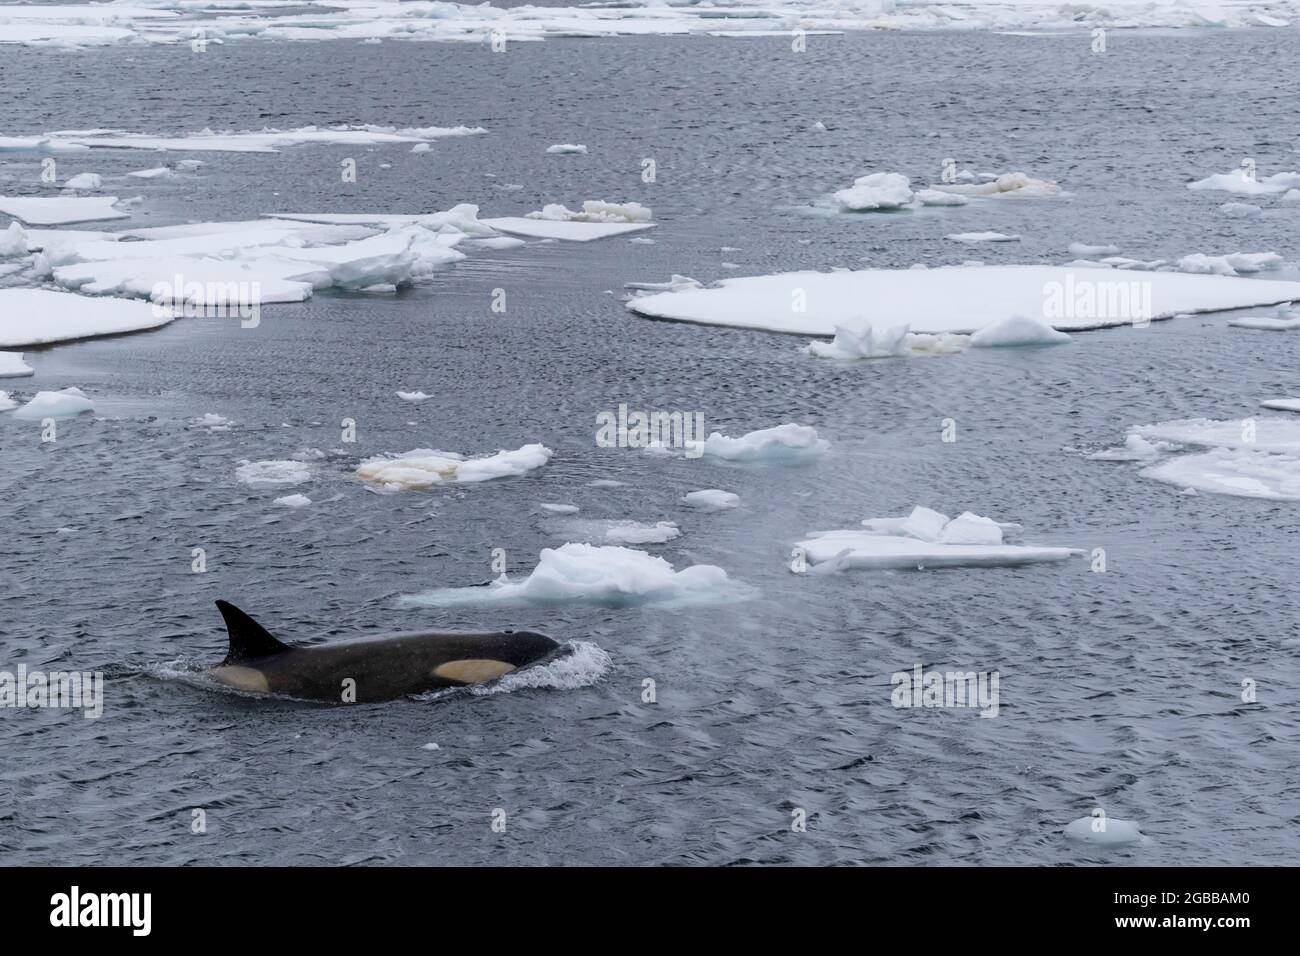 Ecotype Big B killer whale (Orcinus orca), surfacing amongst ice floes in Lemaire Channel, Antarctica, Polar Regions Stock Photo